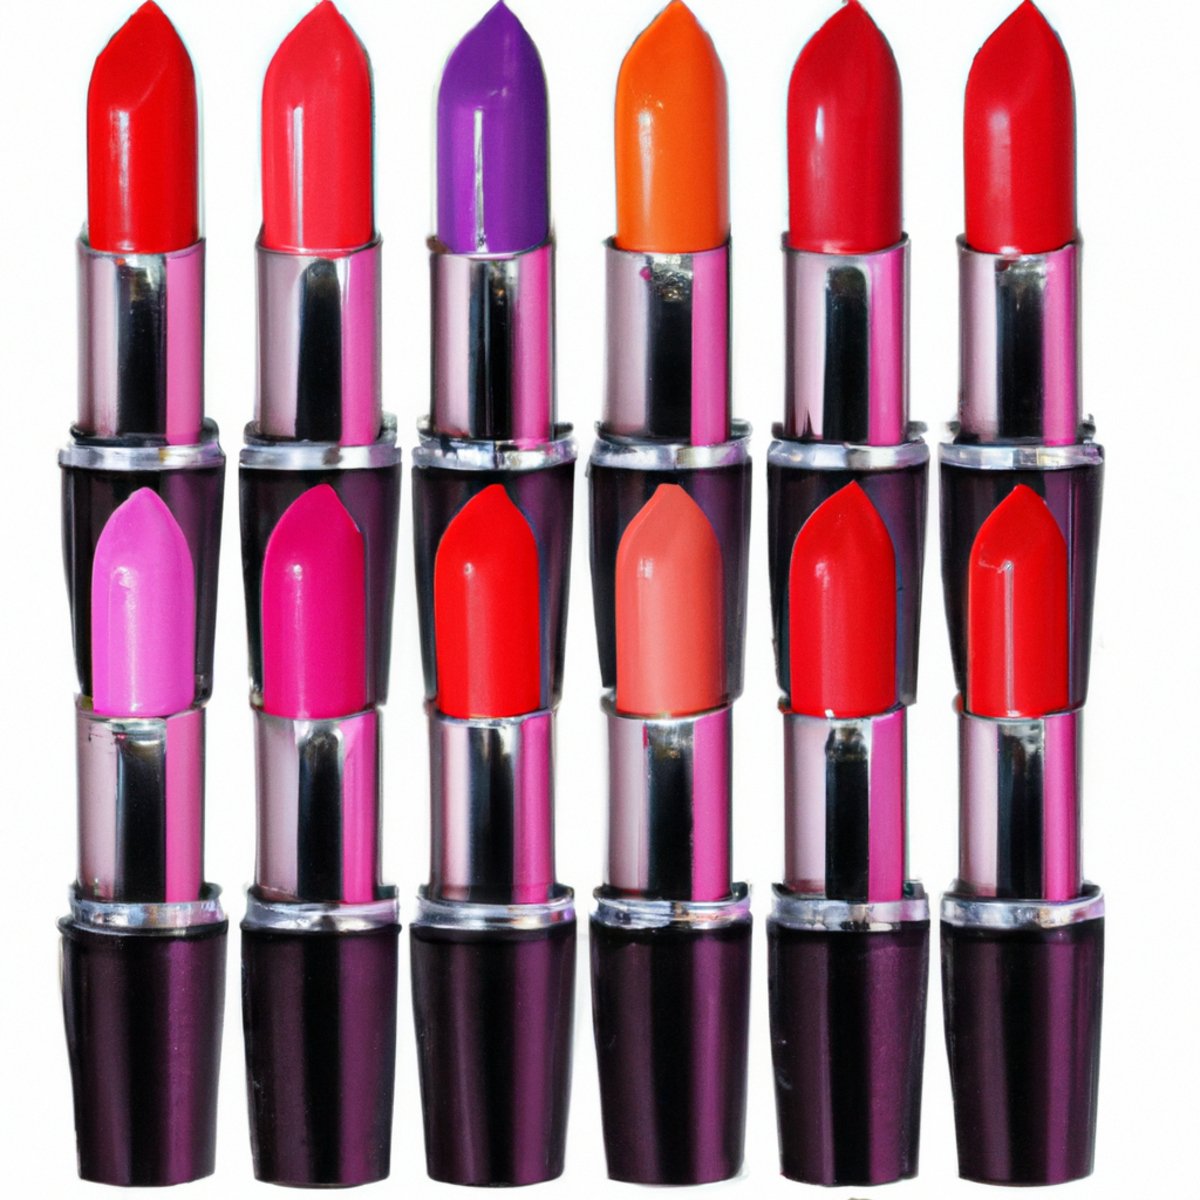 Vibrant and artistic close-up of glossy lipsticks in bold colors, enticing readers to explore and transform their look.